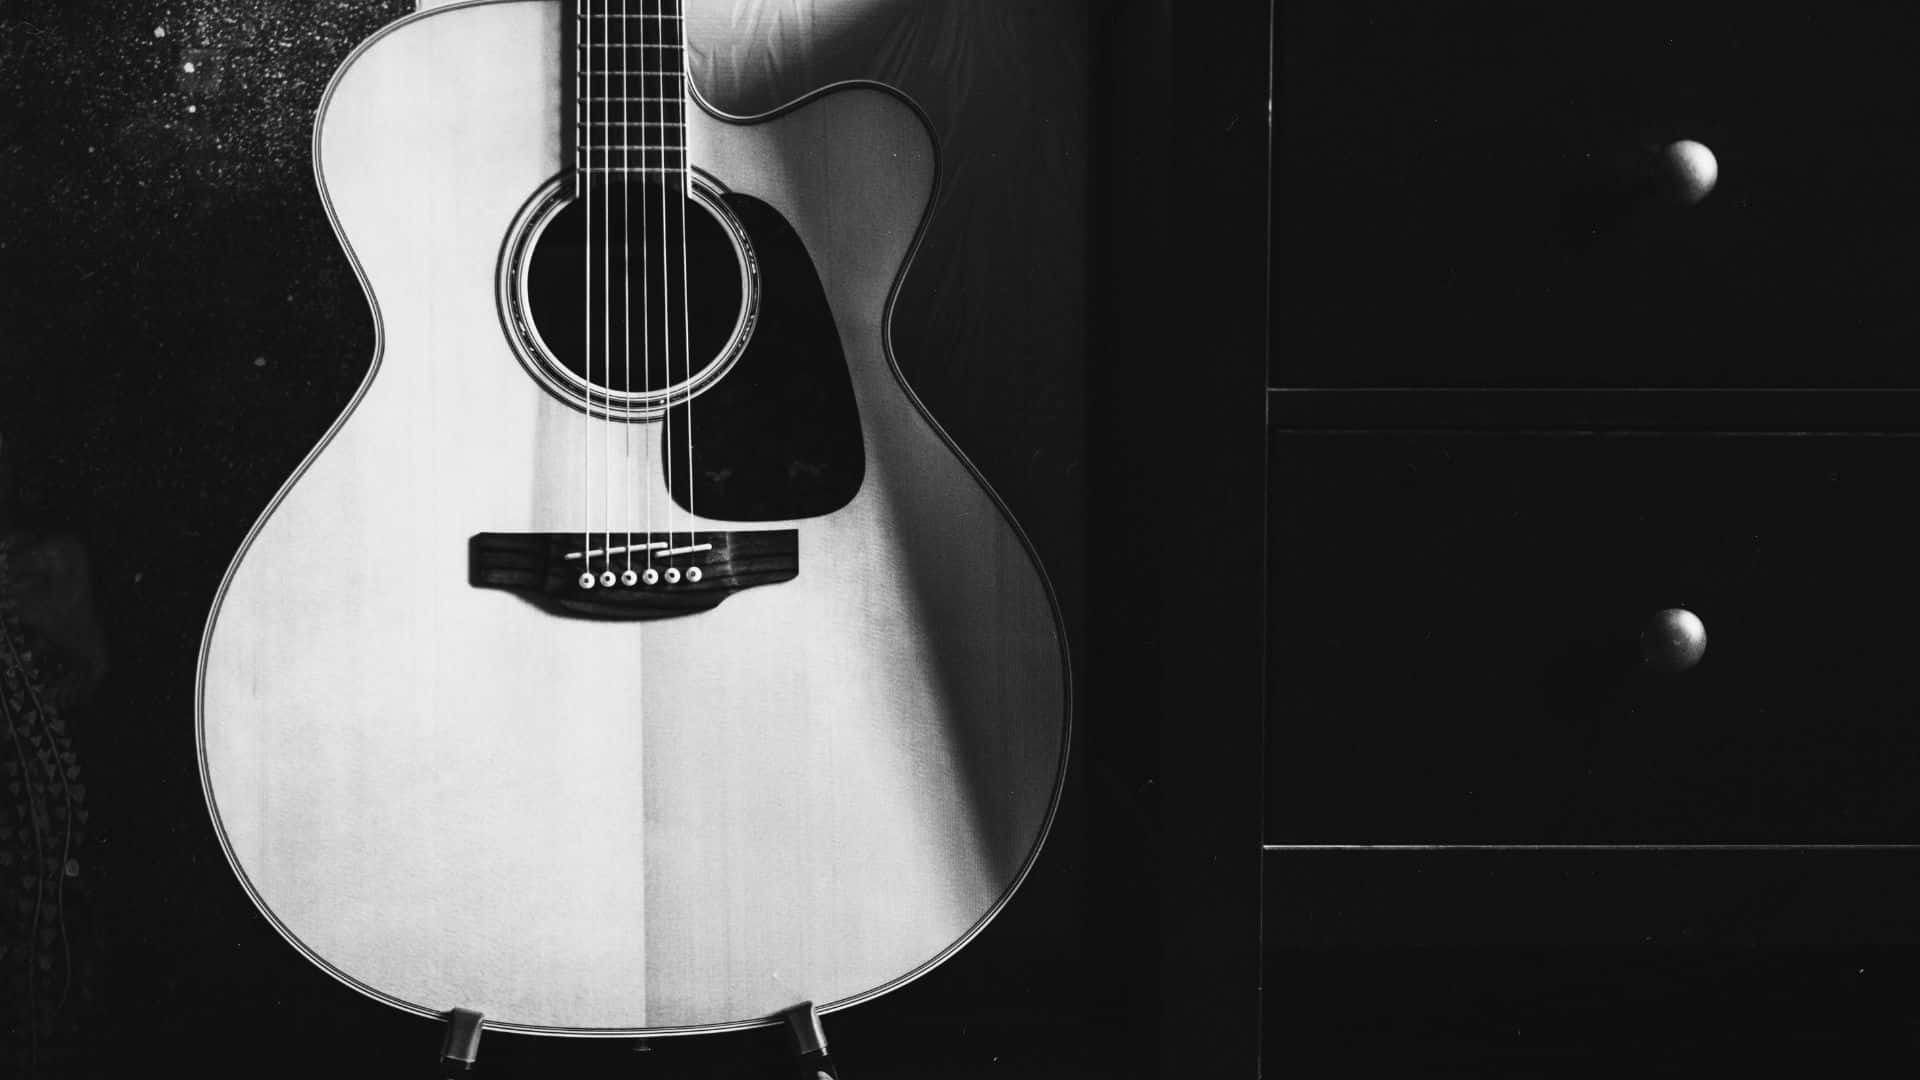 Download Captivating Black and White Guitar Wallpaper | Wallpapers.com